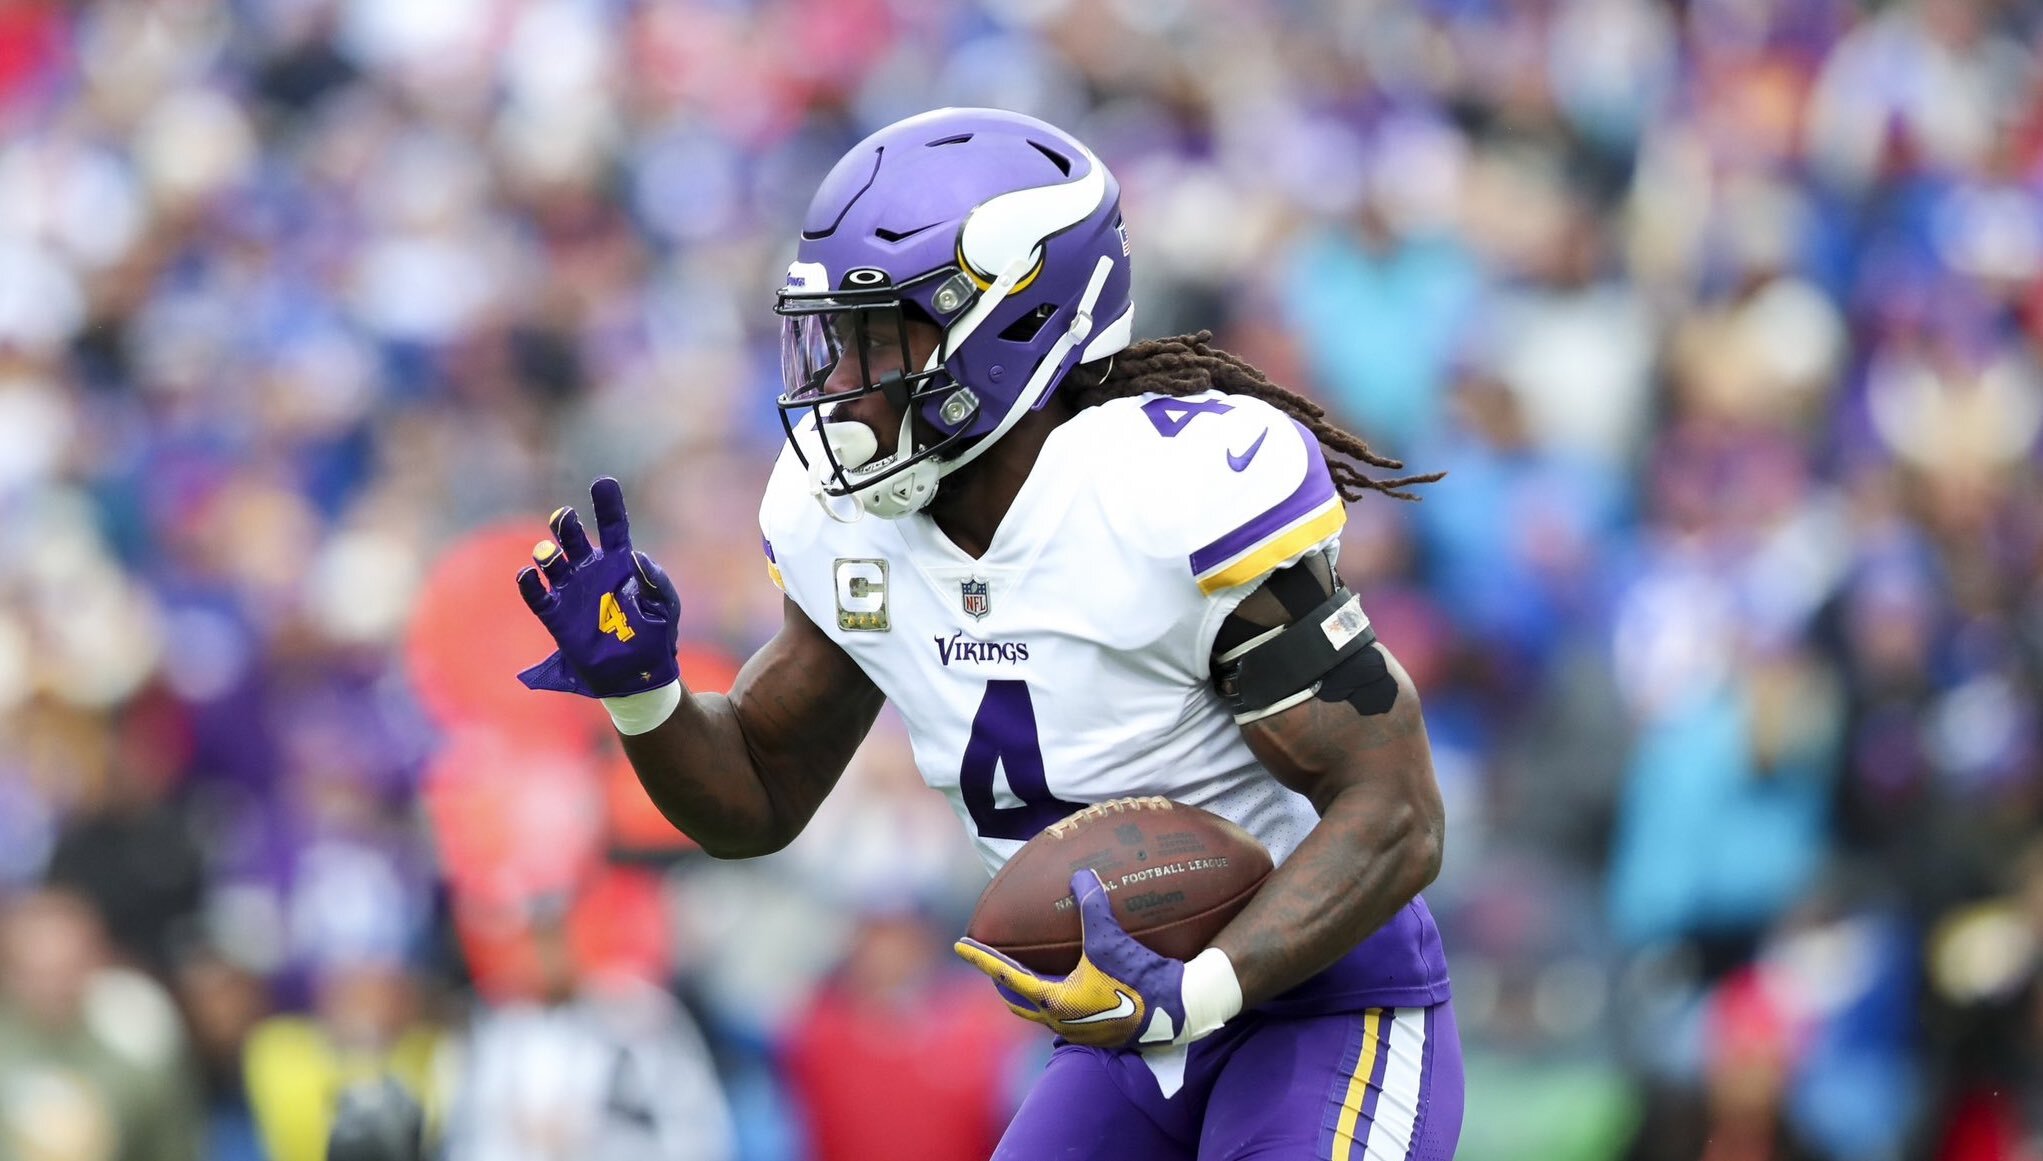 5 Fun Facts About Dalvin Cook